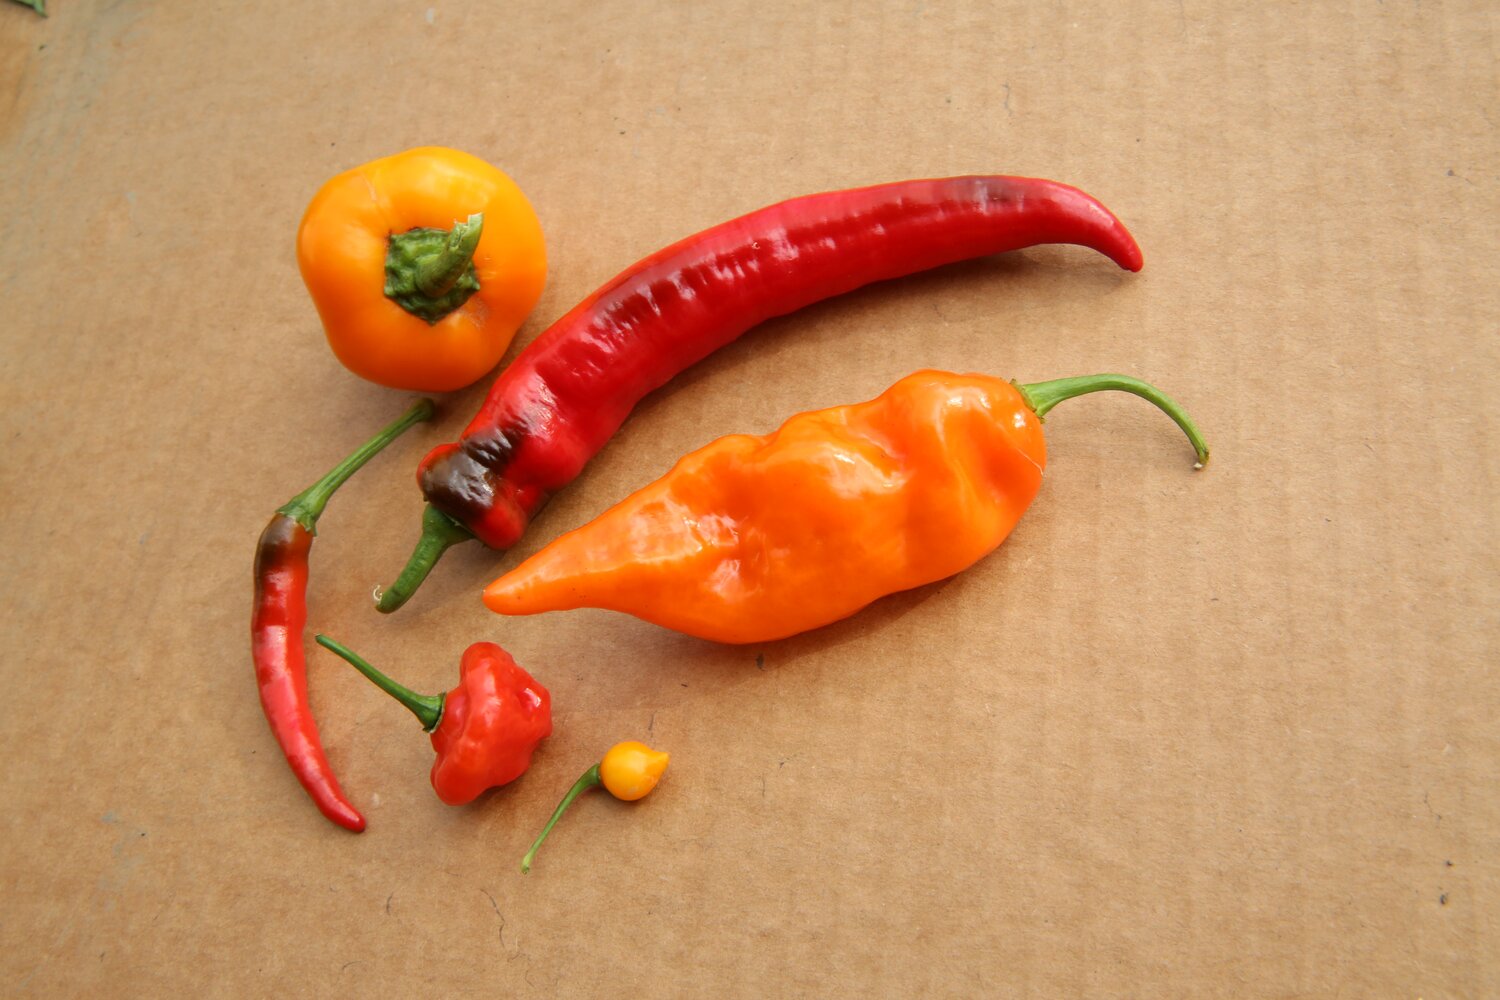 Originating in Mexico, chili peppers have been a part of the human diet in the Americas since at least 7500 B.C. For the rest of the world, they were “discovered” by Christopher Columbus. Jalapeños, Habaneros, Serrano, Cayenne, Poblano —there are almost 2 – 3,000 different cultivars grown across the world today. Credit: L.M. Salazar/Crop Trust